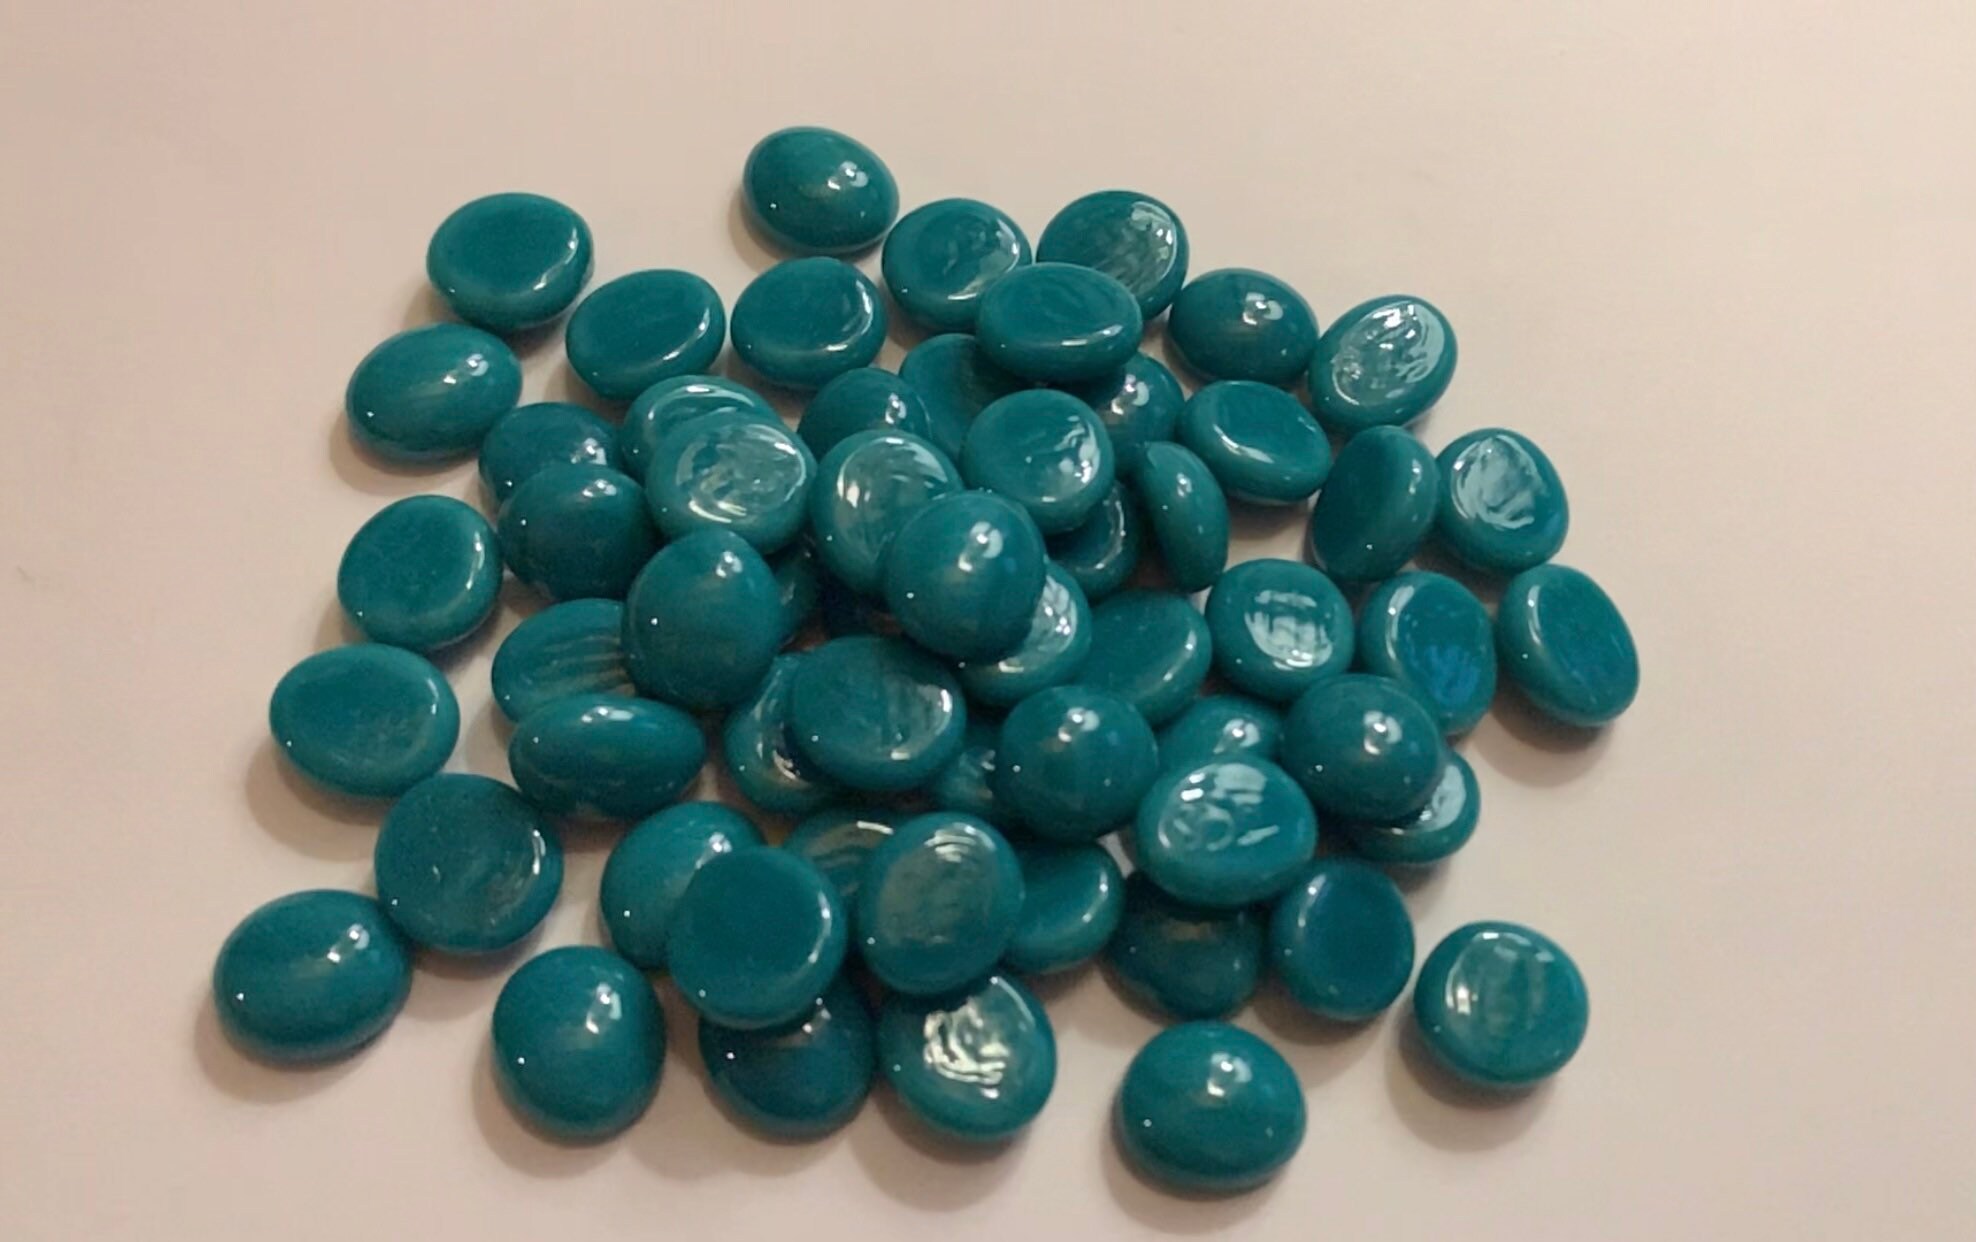 13mm 1/2 Flat Glass Marbles, Turquoise Blue Opaque, Glass Gems, Cabochons,  Mosaics, Glass Nuggets 